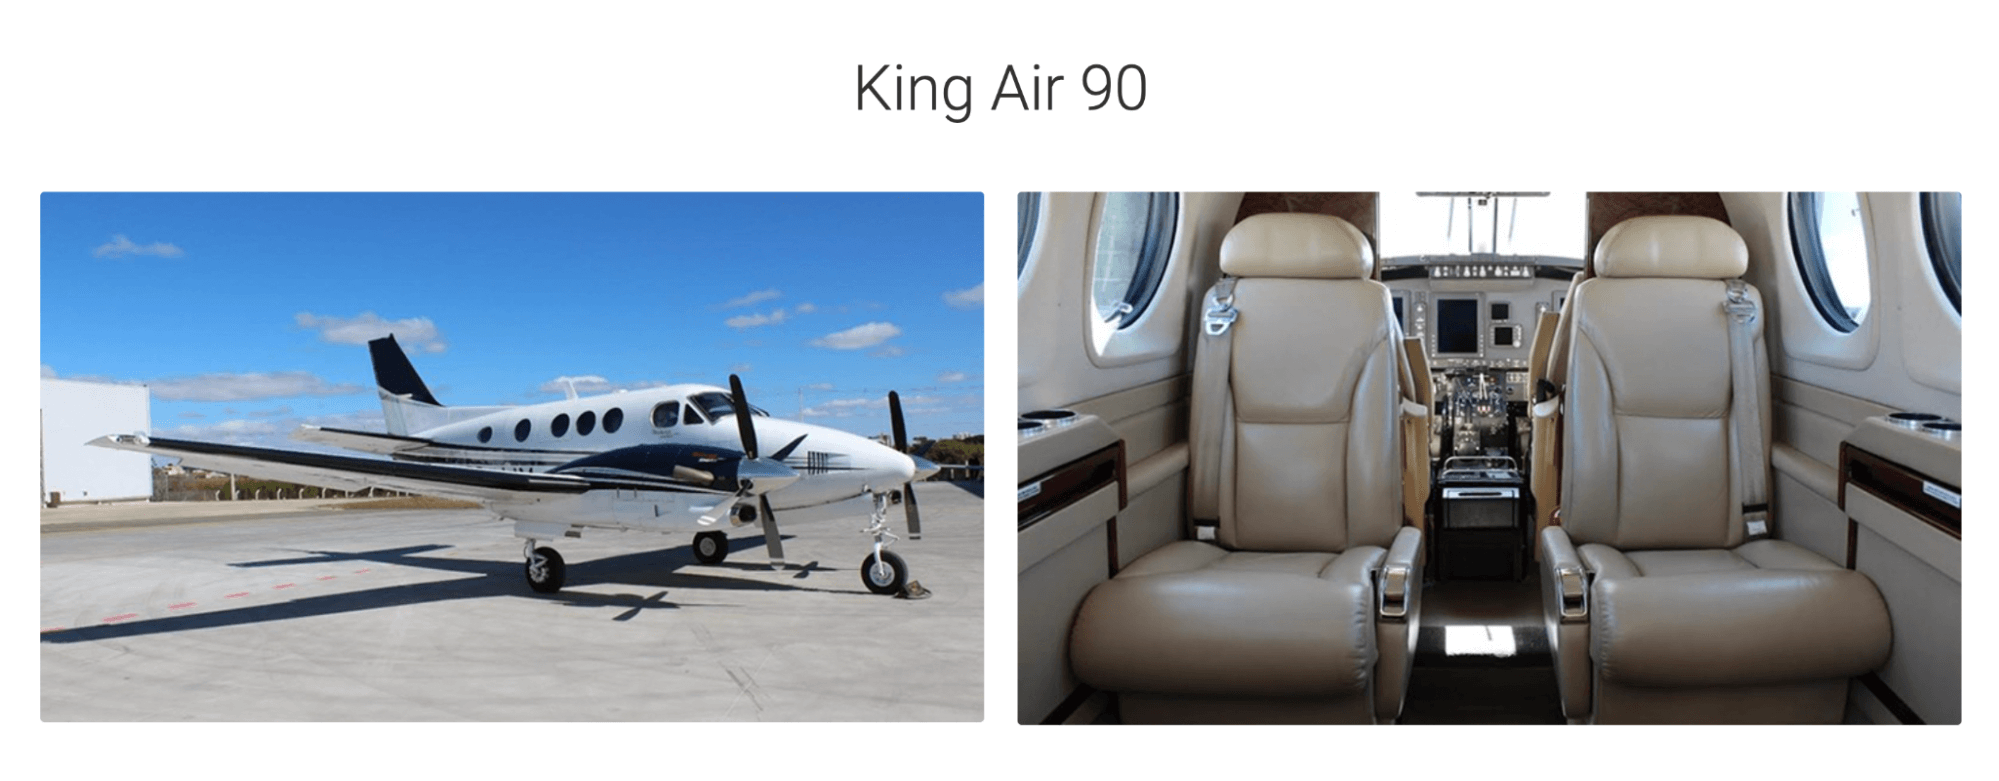 An exterior and interior picture of the turboprop jet King Air 90.